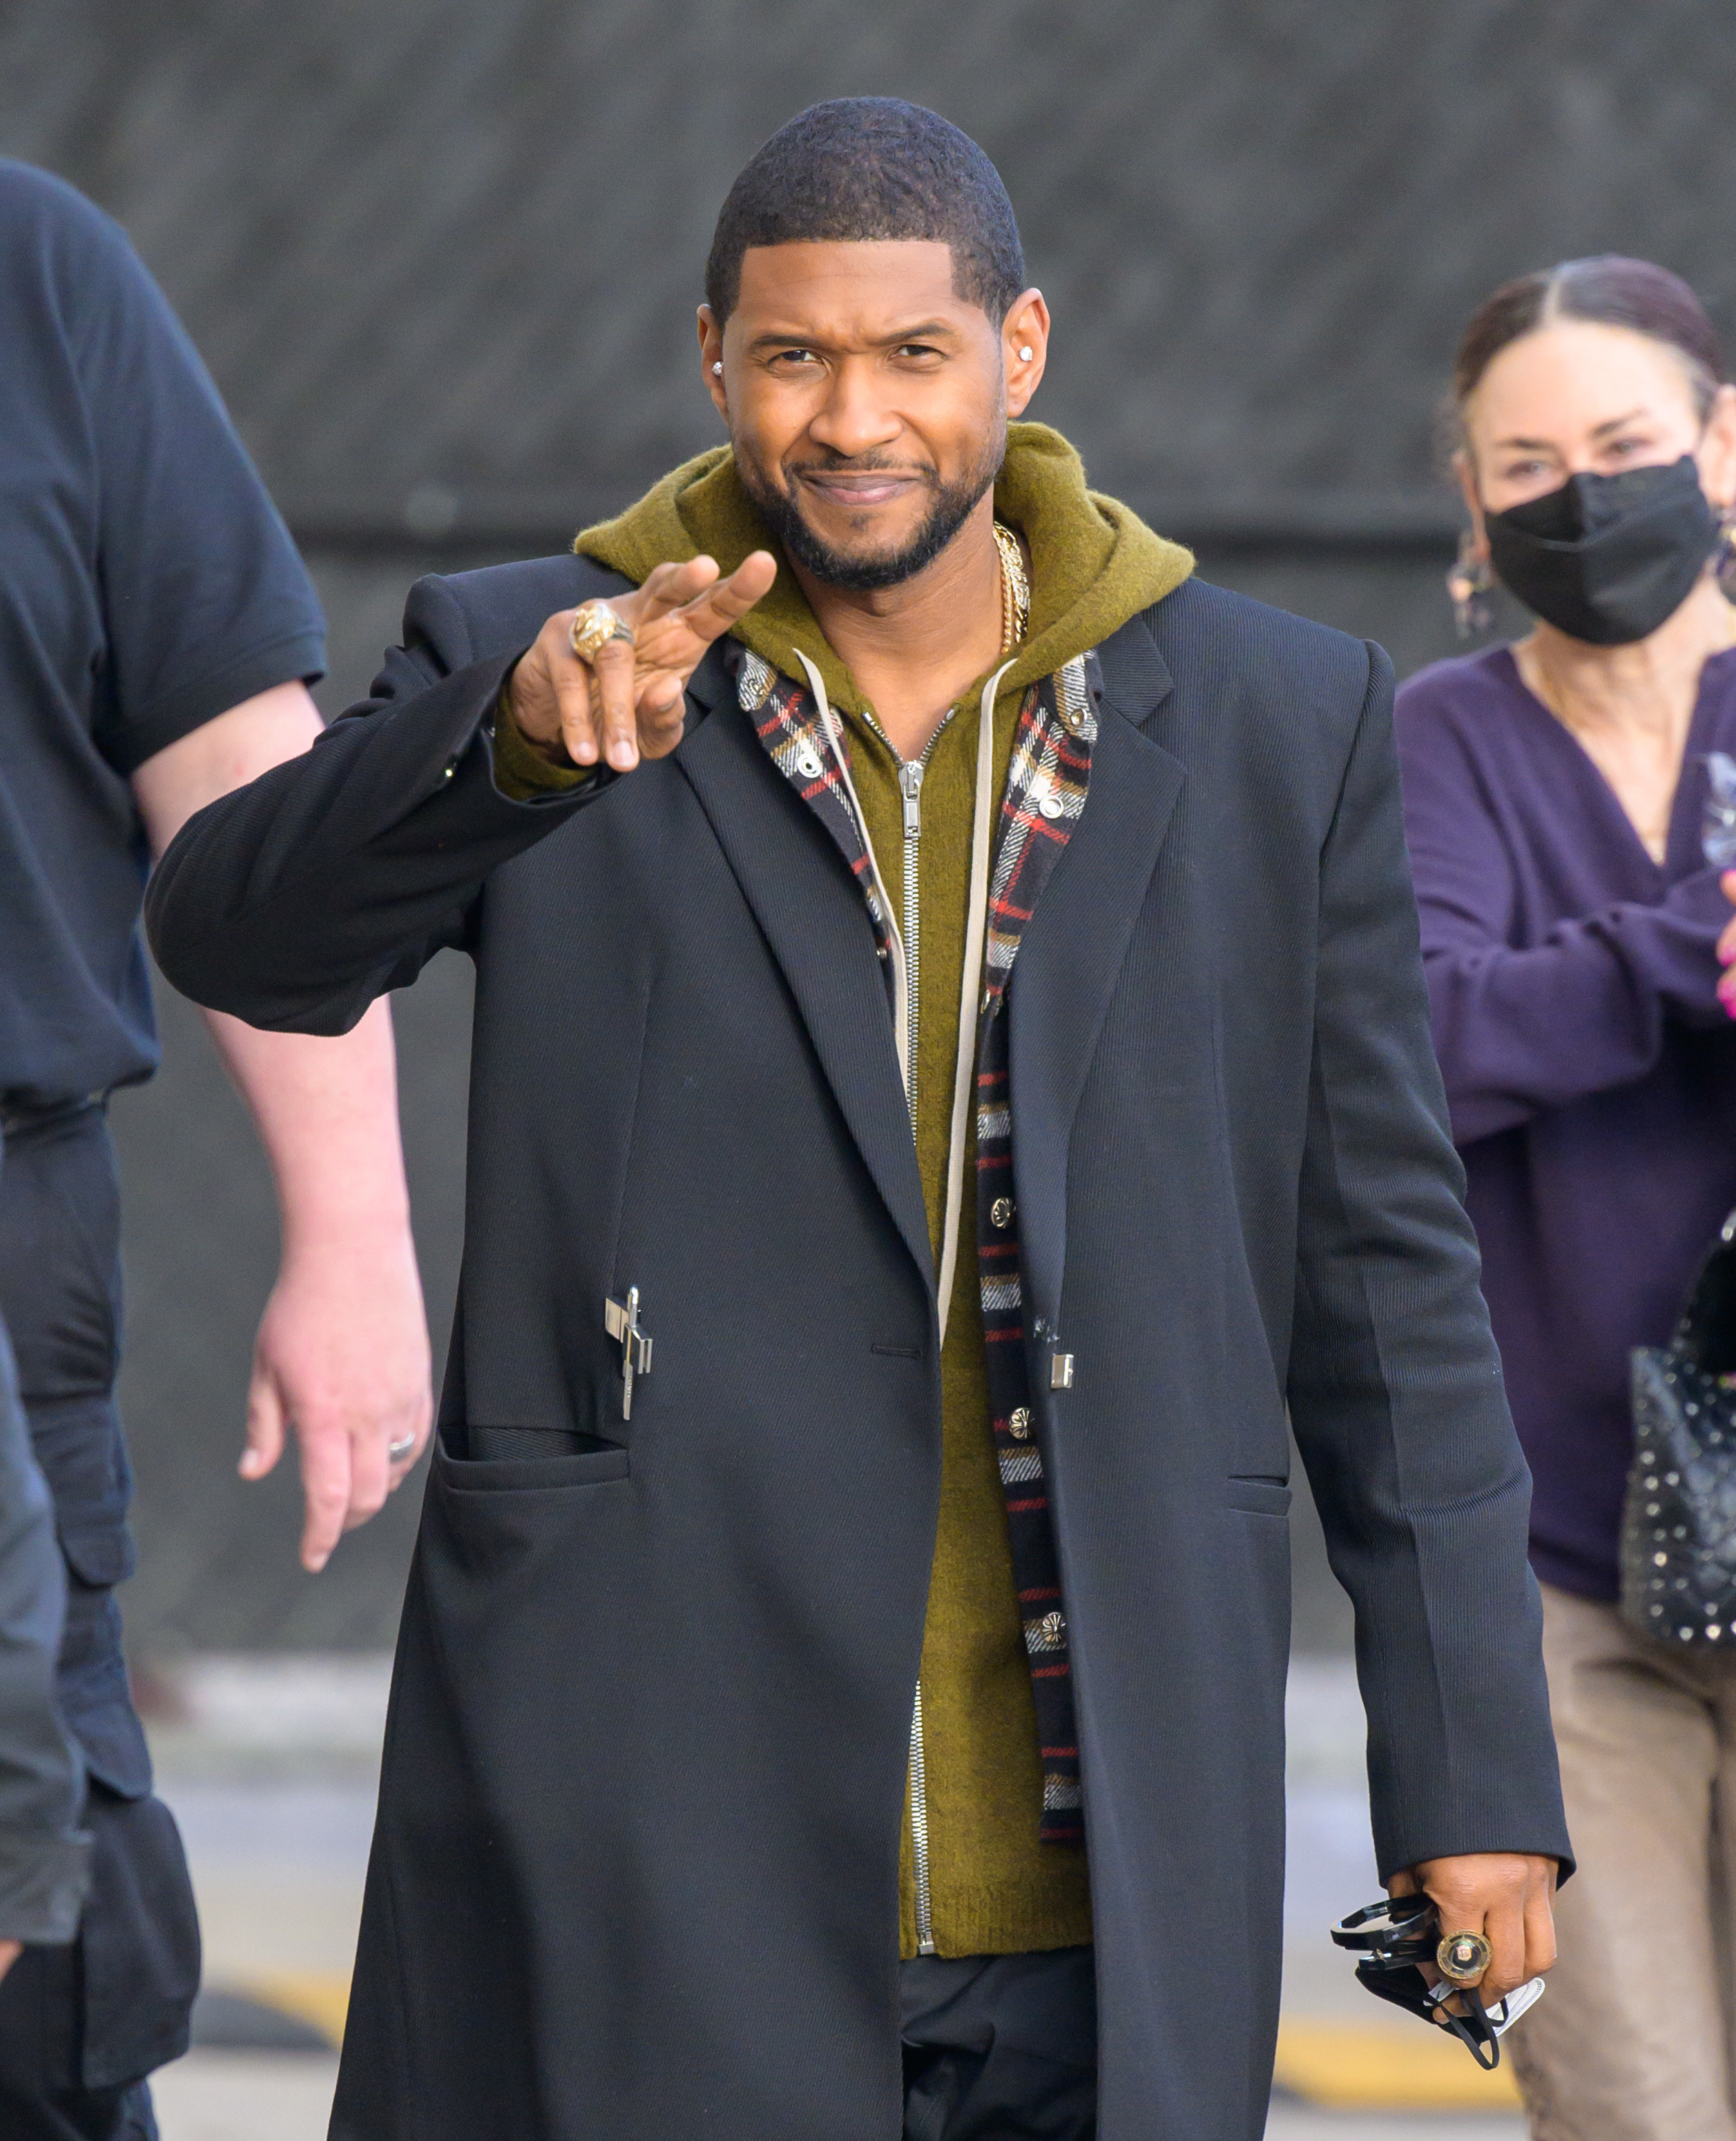 Usher smiling and giving the peace sign with people around him outside